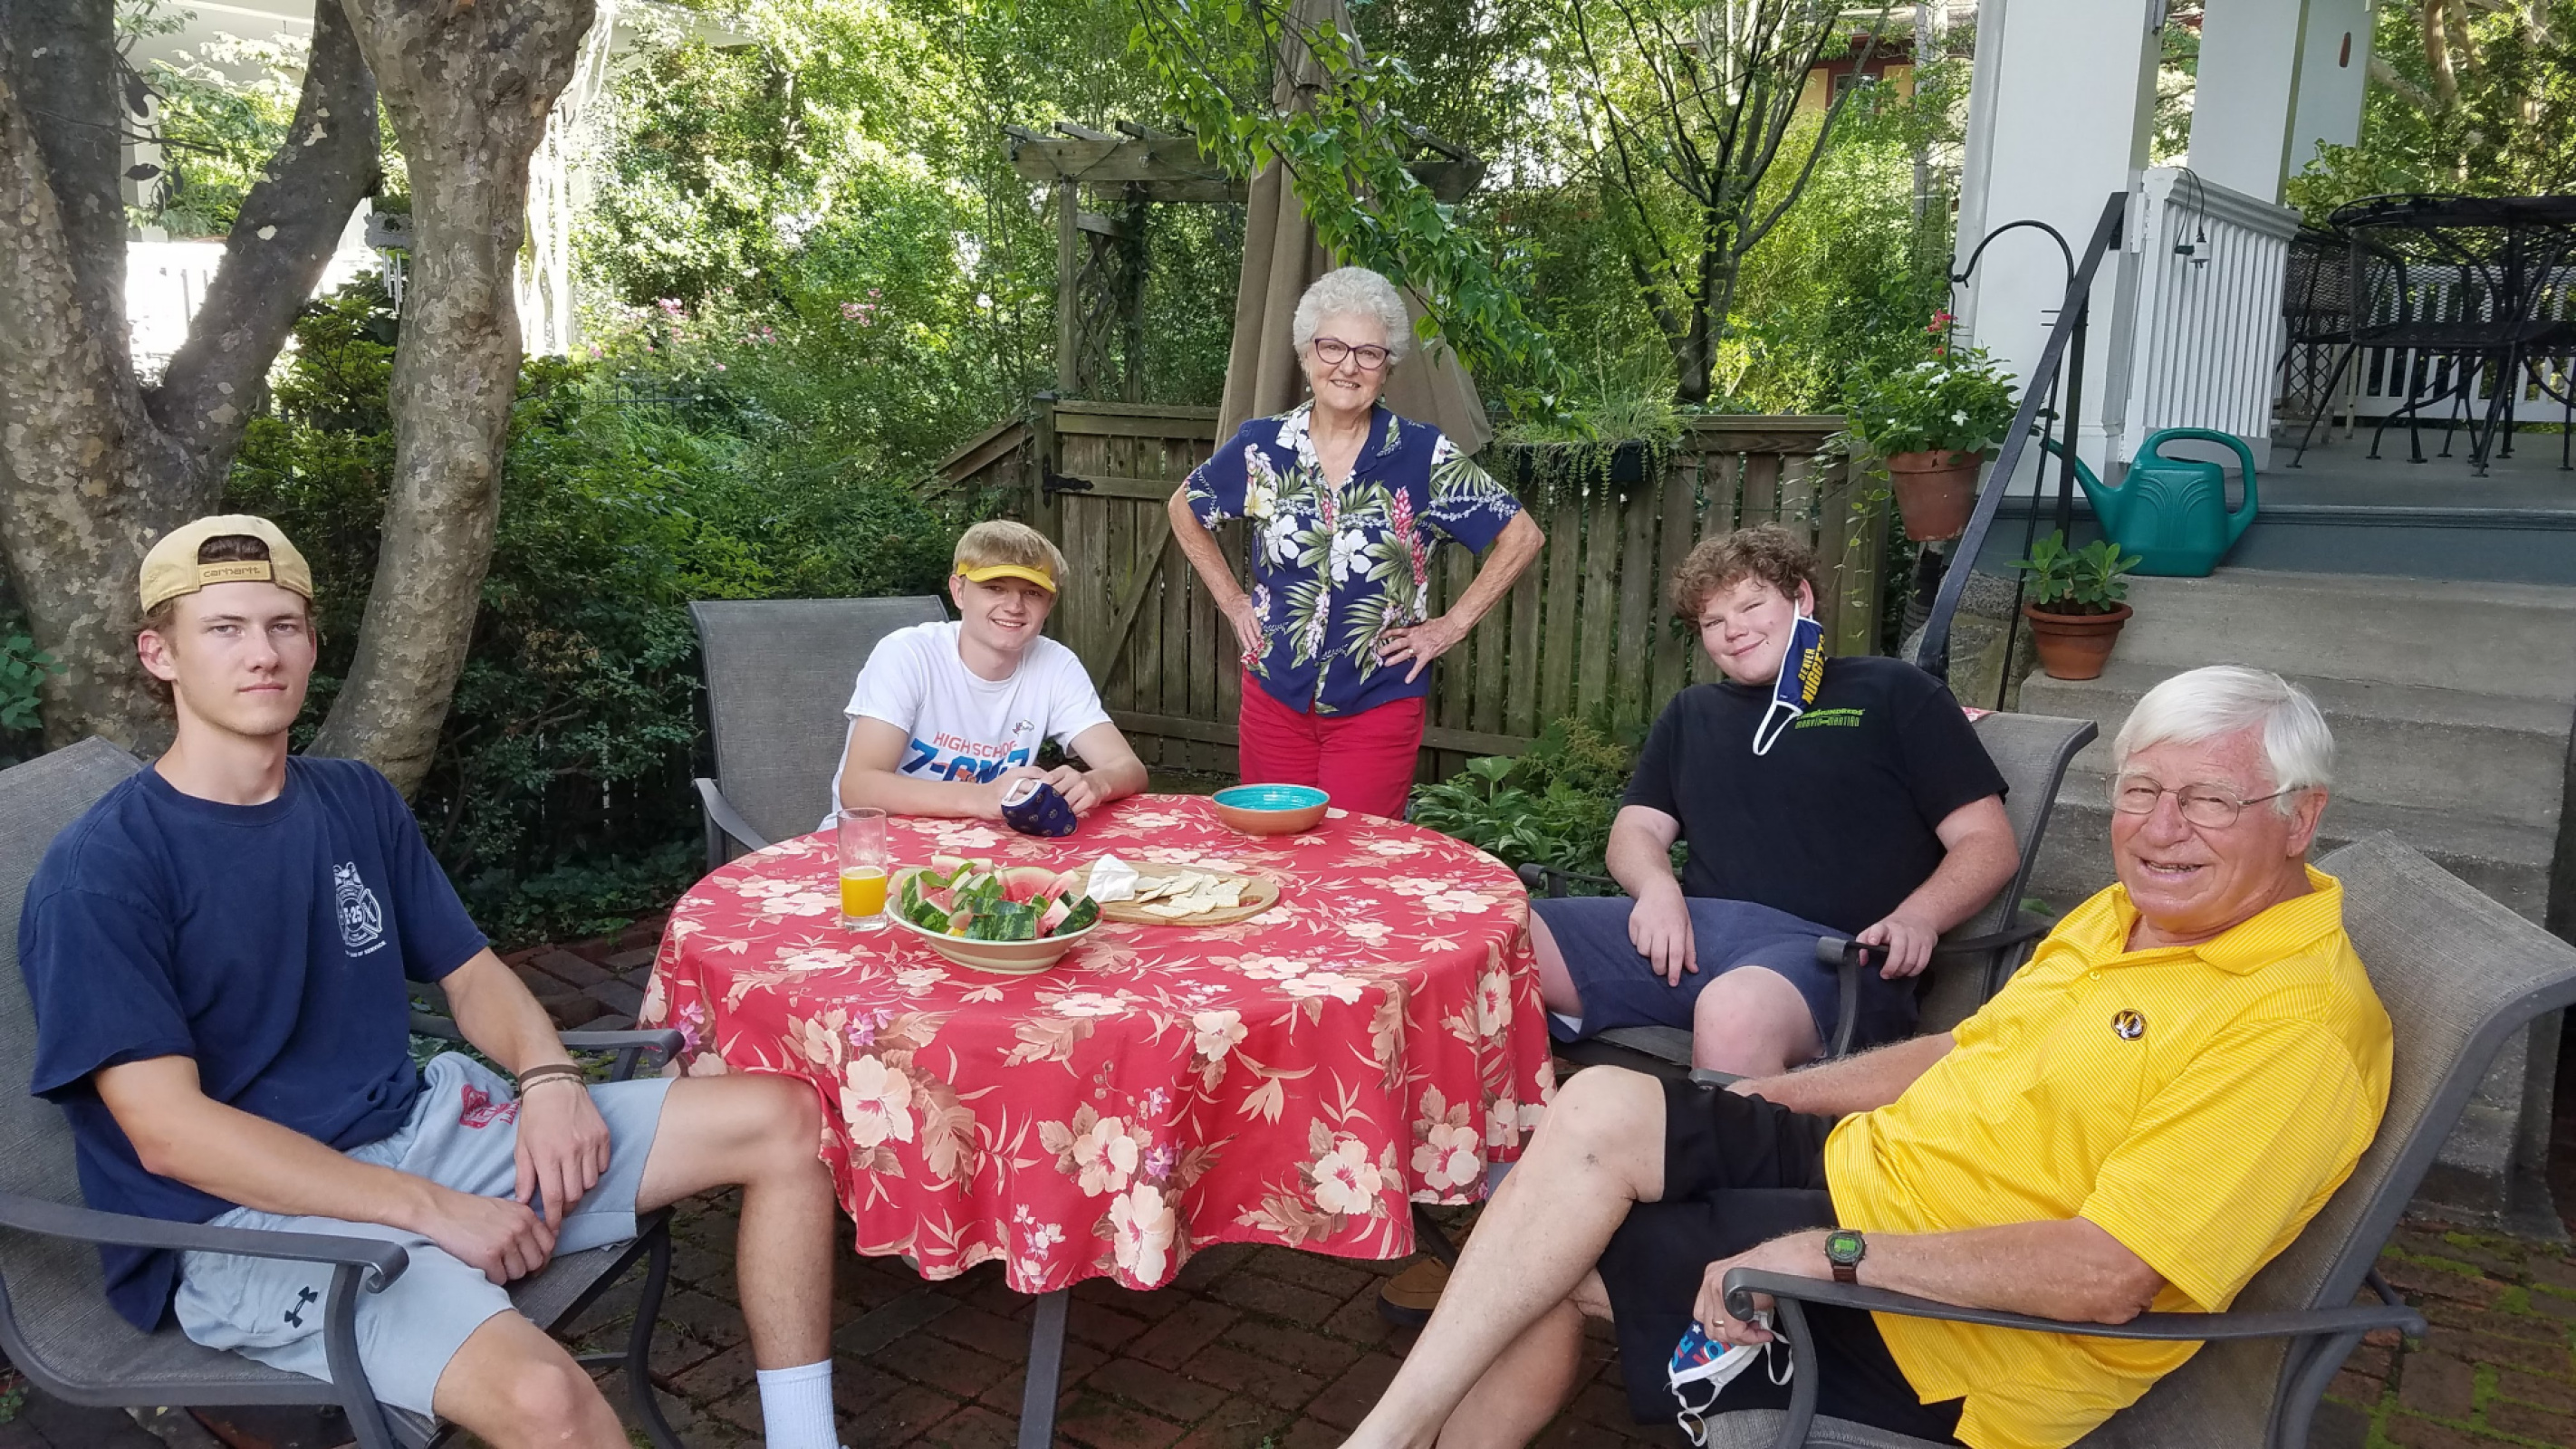 Feeding the troops after free grandkid labor